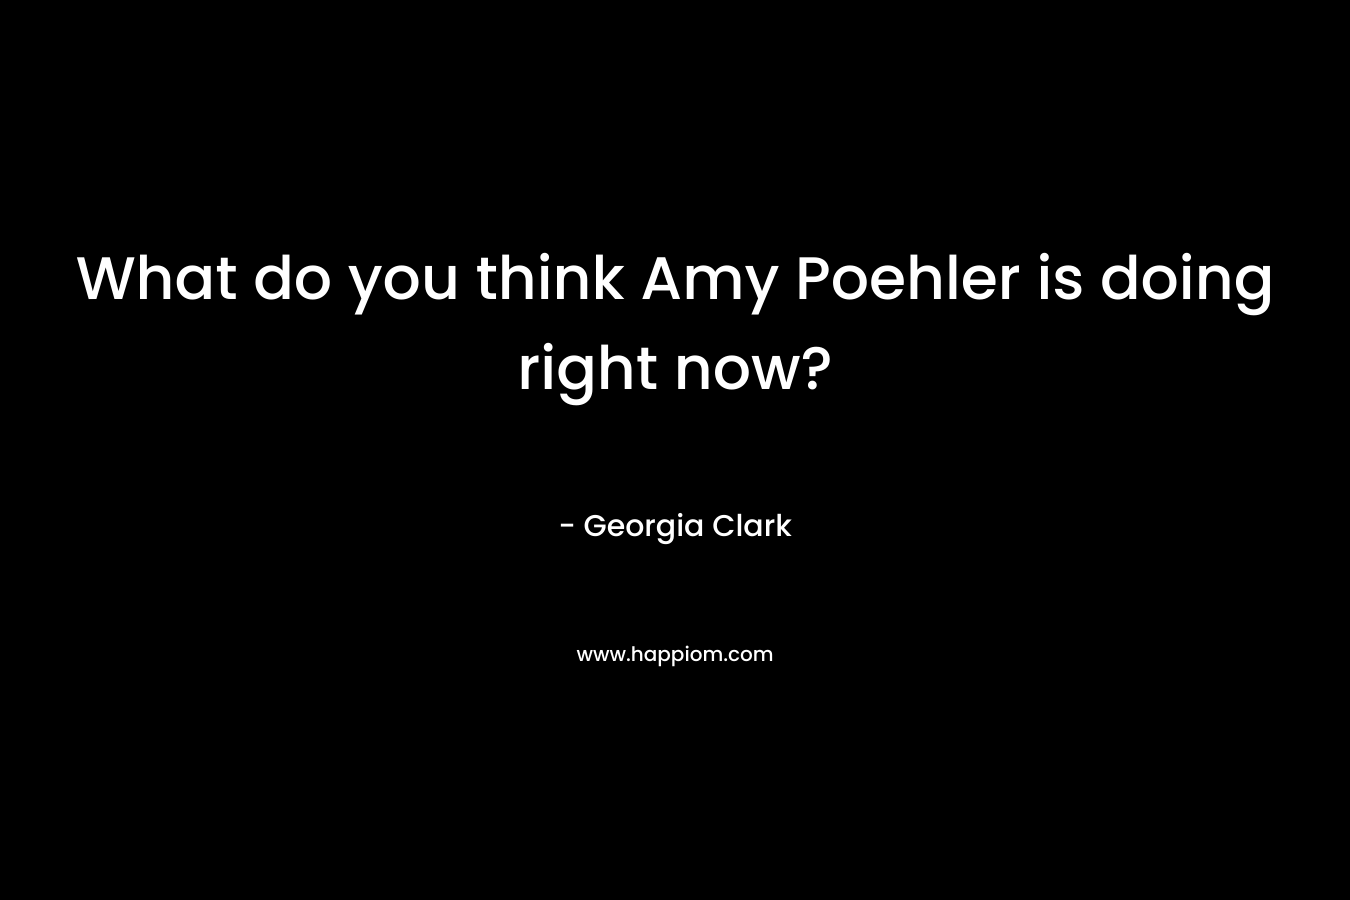 What do you think Amy Poehler is doing right now?